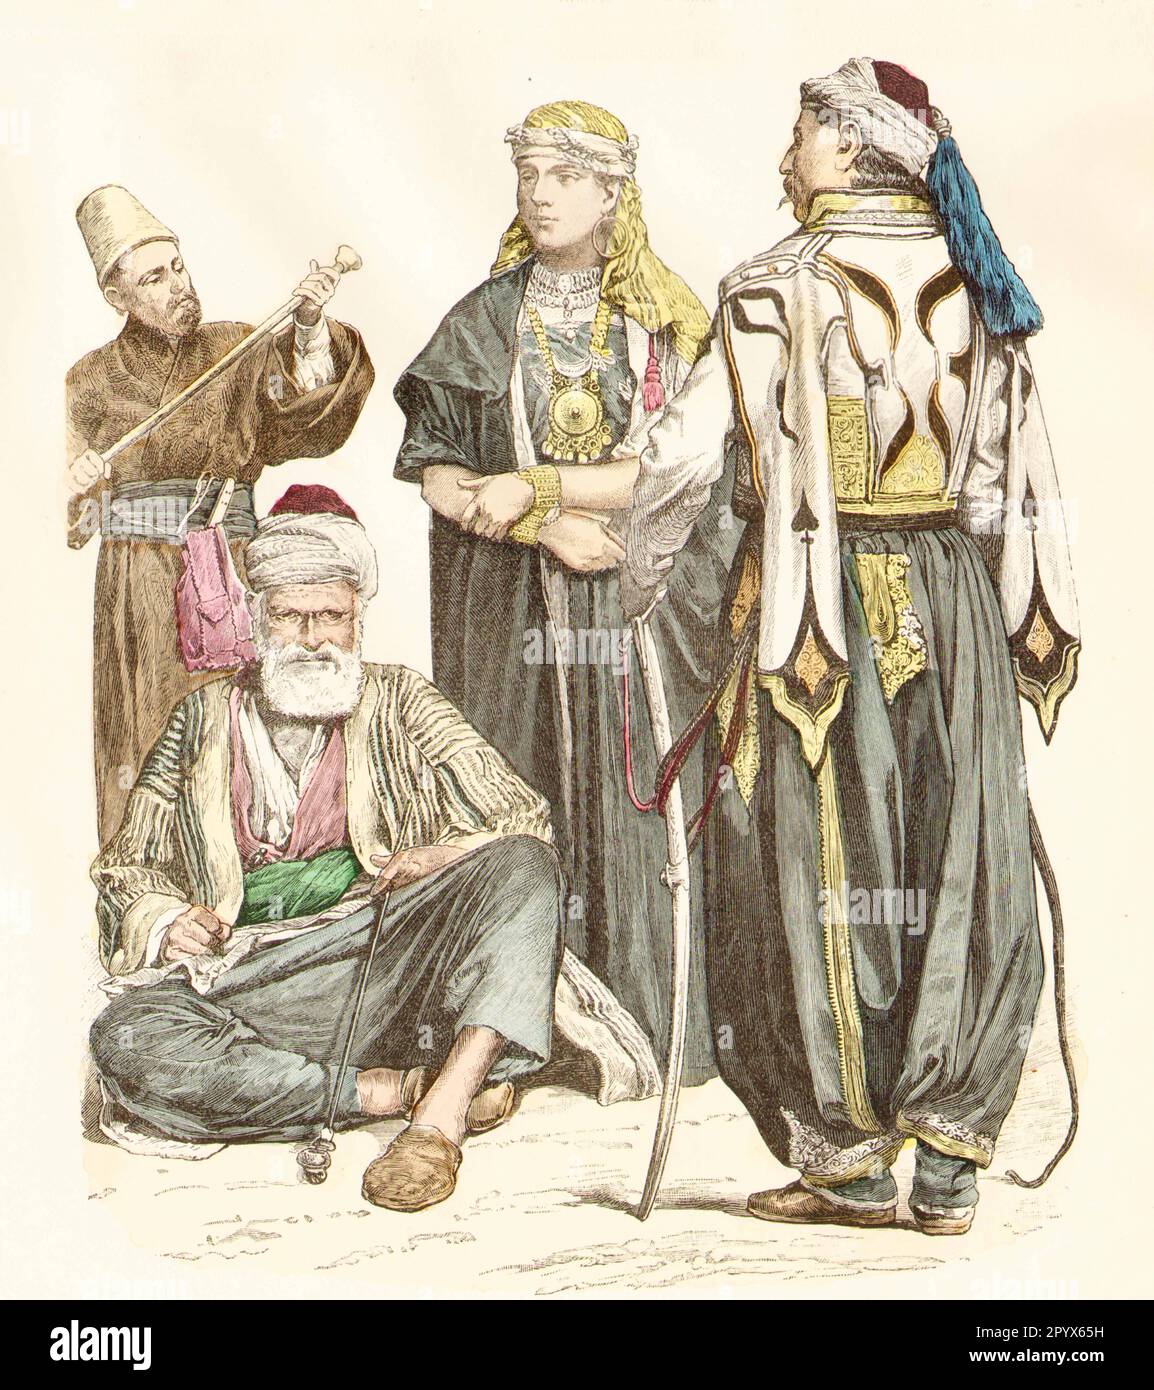 People from the area of modern Syria and Lebanon in contemporary dress: Dervish, Peasant, Drusin and Kawasse. [automated translation] Stock Photo